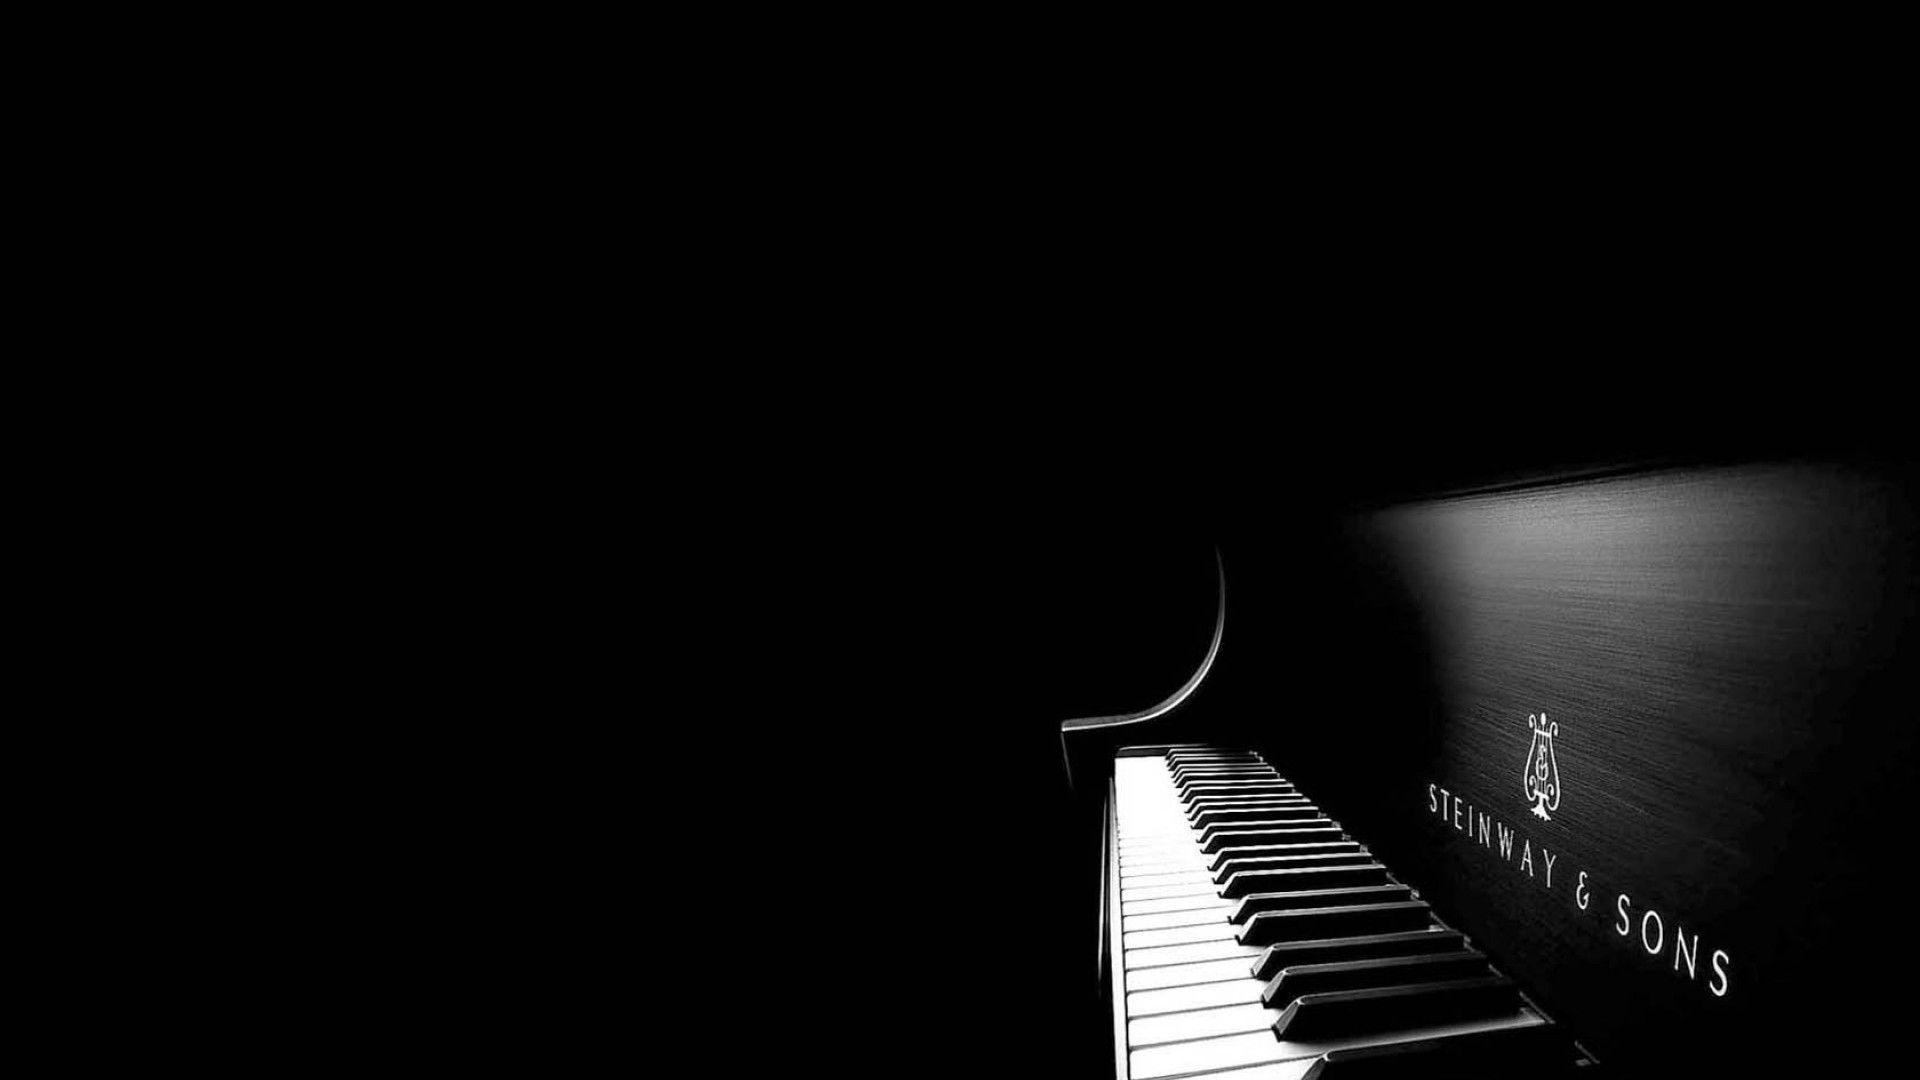 As a pianist, this is my wallpaper